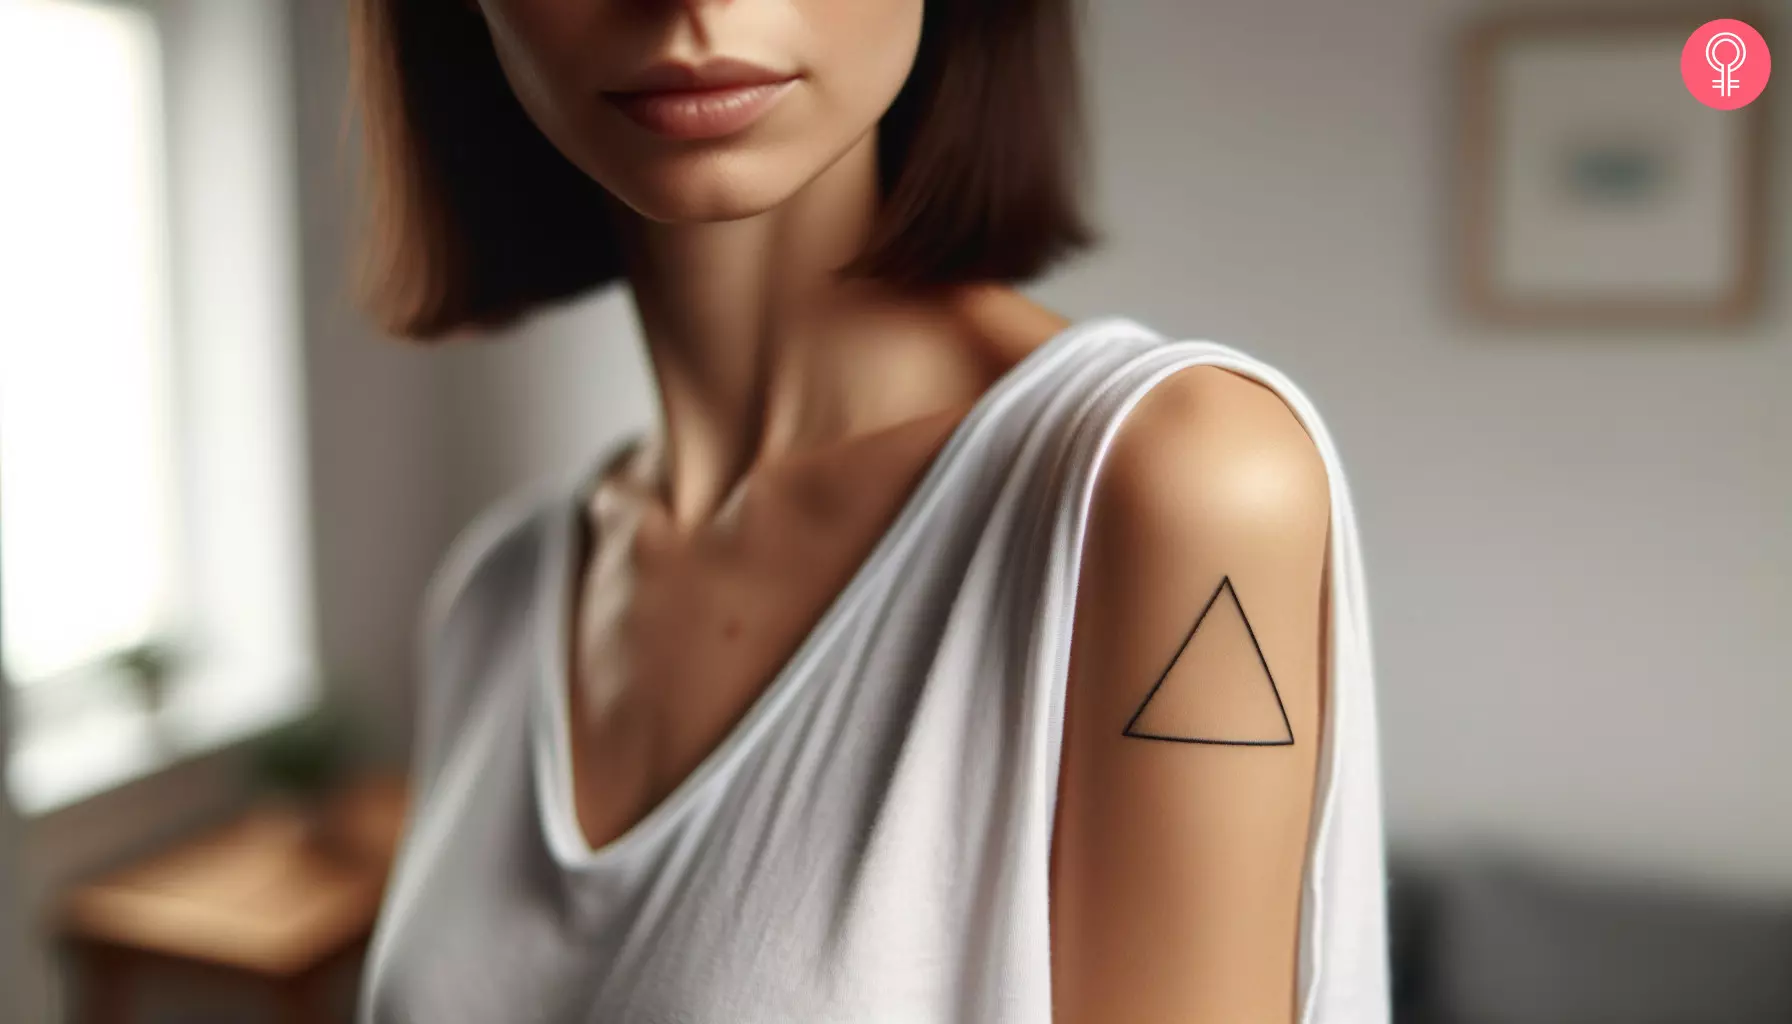 A woman with an equilateral triangle tattoo on her upper arm